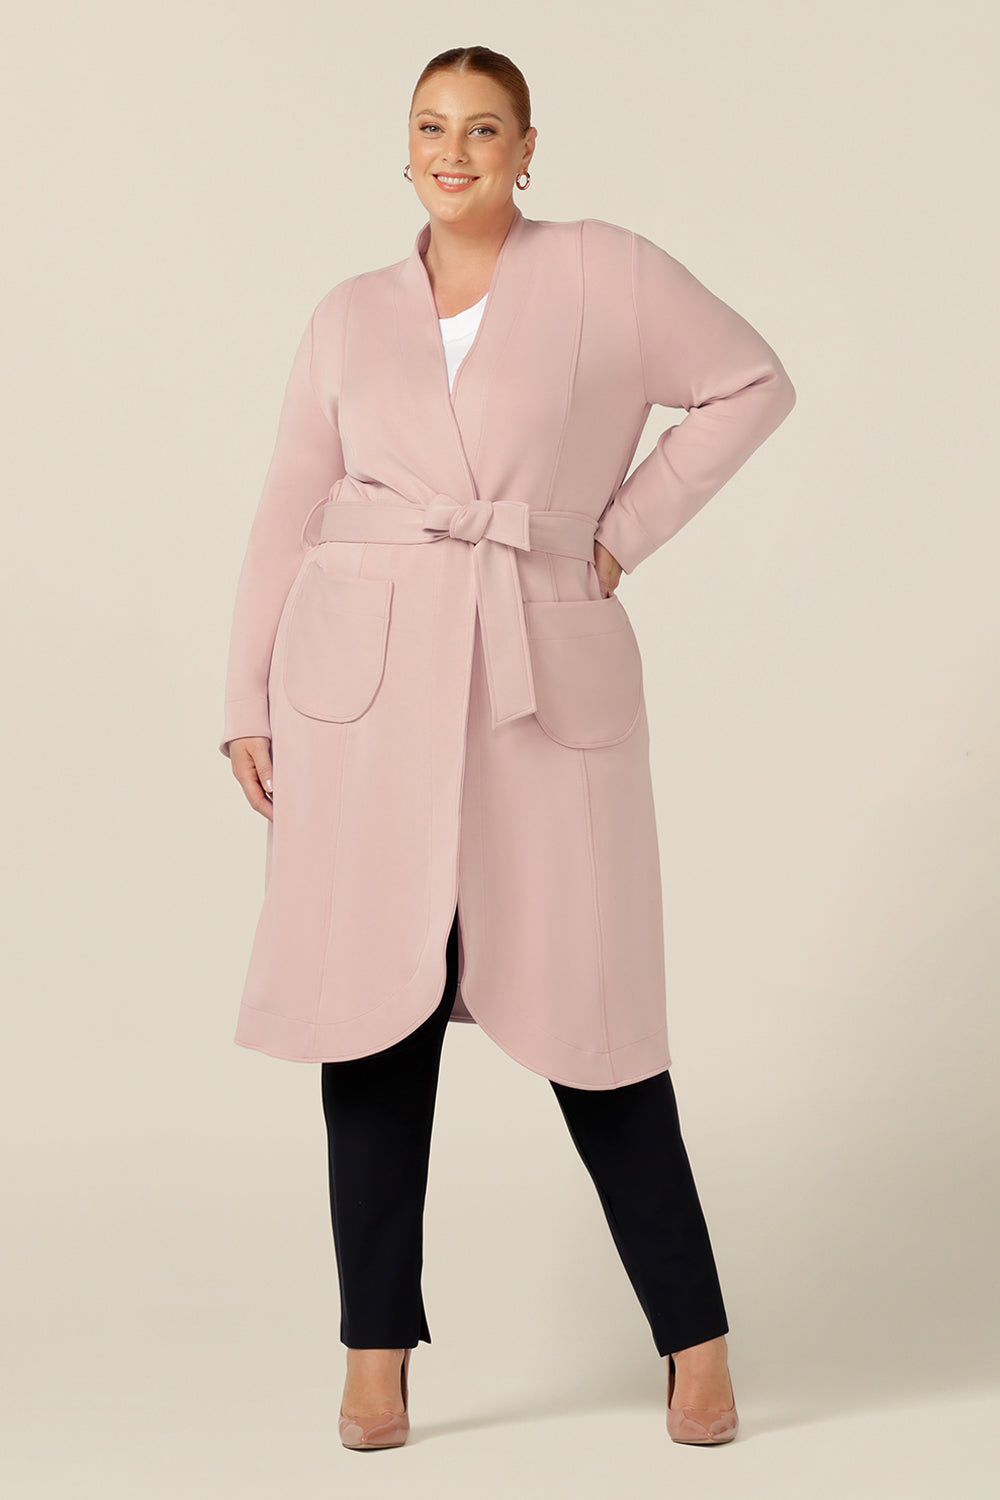 wrap up for winter in this stylish soft tailoring trenchcoat by Australia and New Zealand women's clothing label, L&F. Featuring a grown on collar, long sleeves, midi-length hemline and fabric belt tie, this luxurious feel coat in dusty pink modal wears well over corporate suiting and workwear layers .